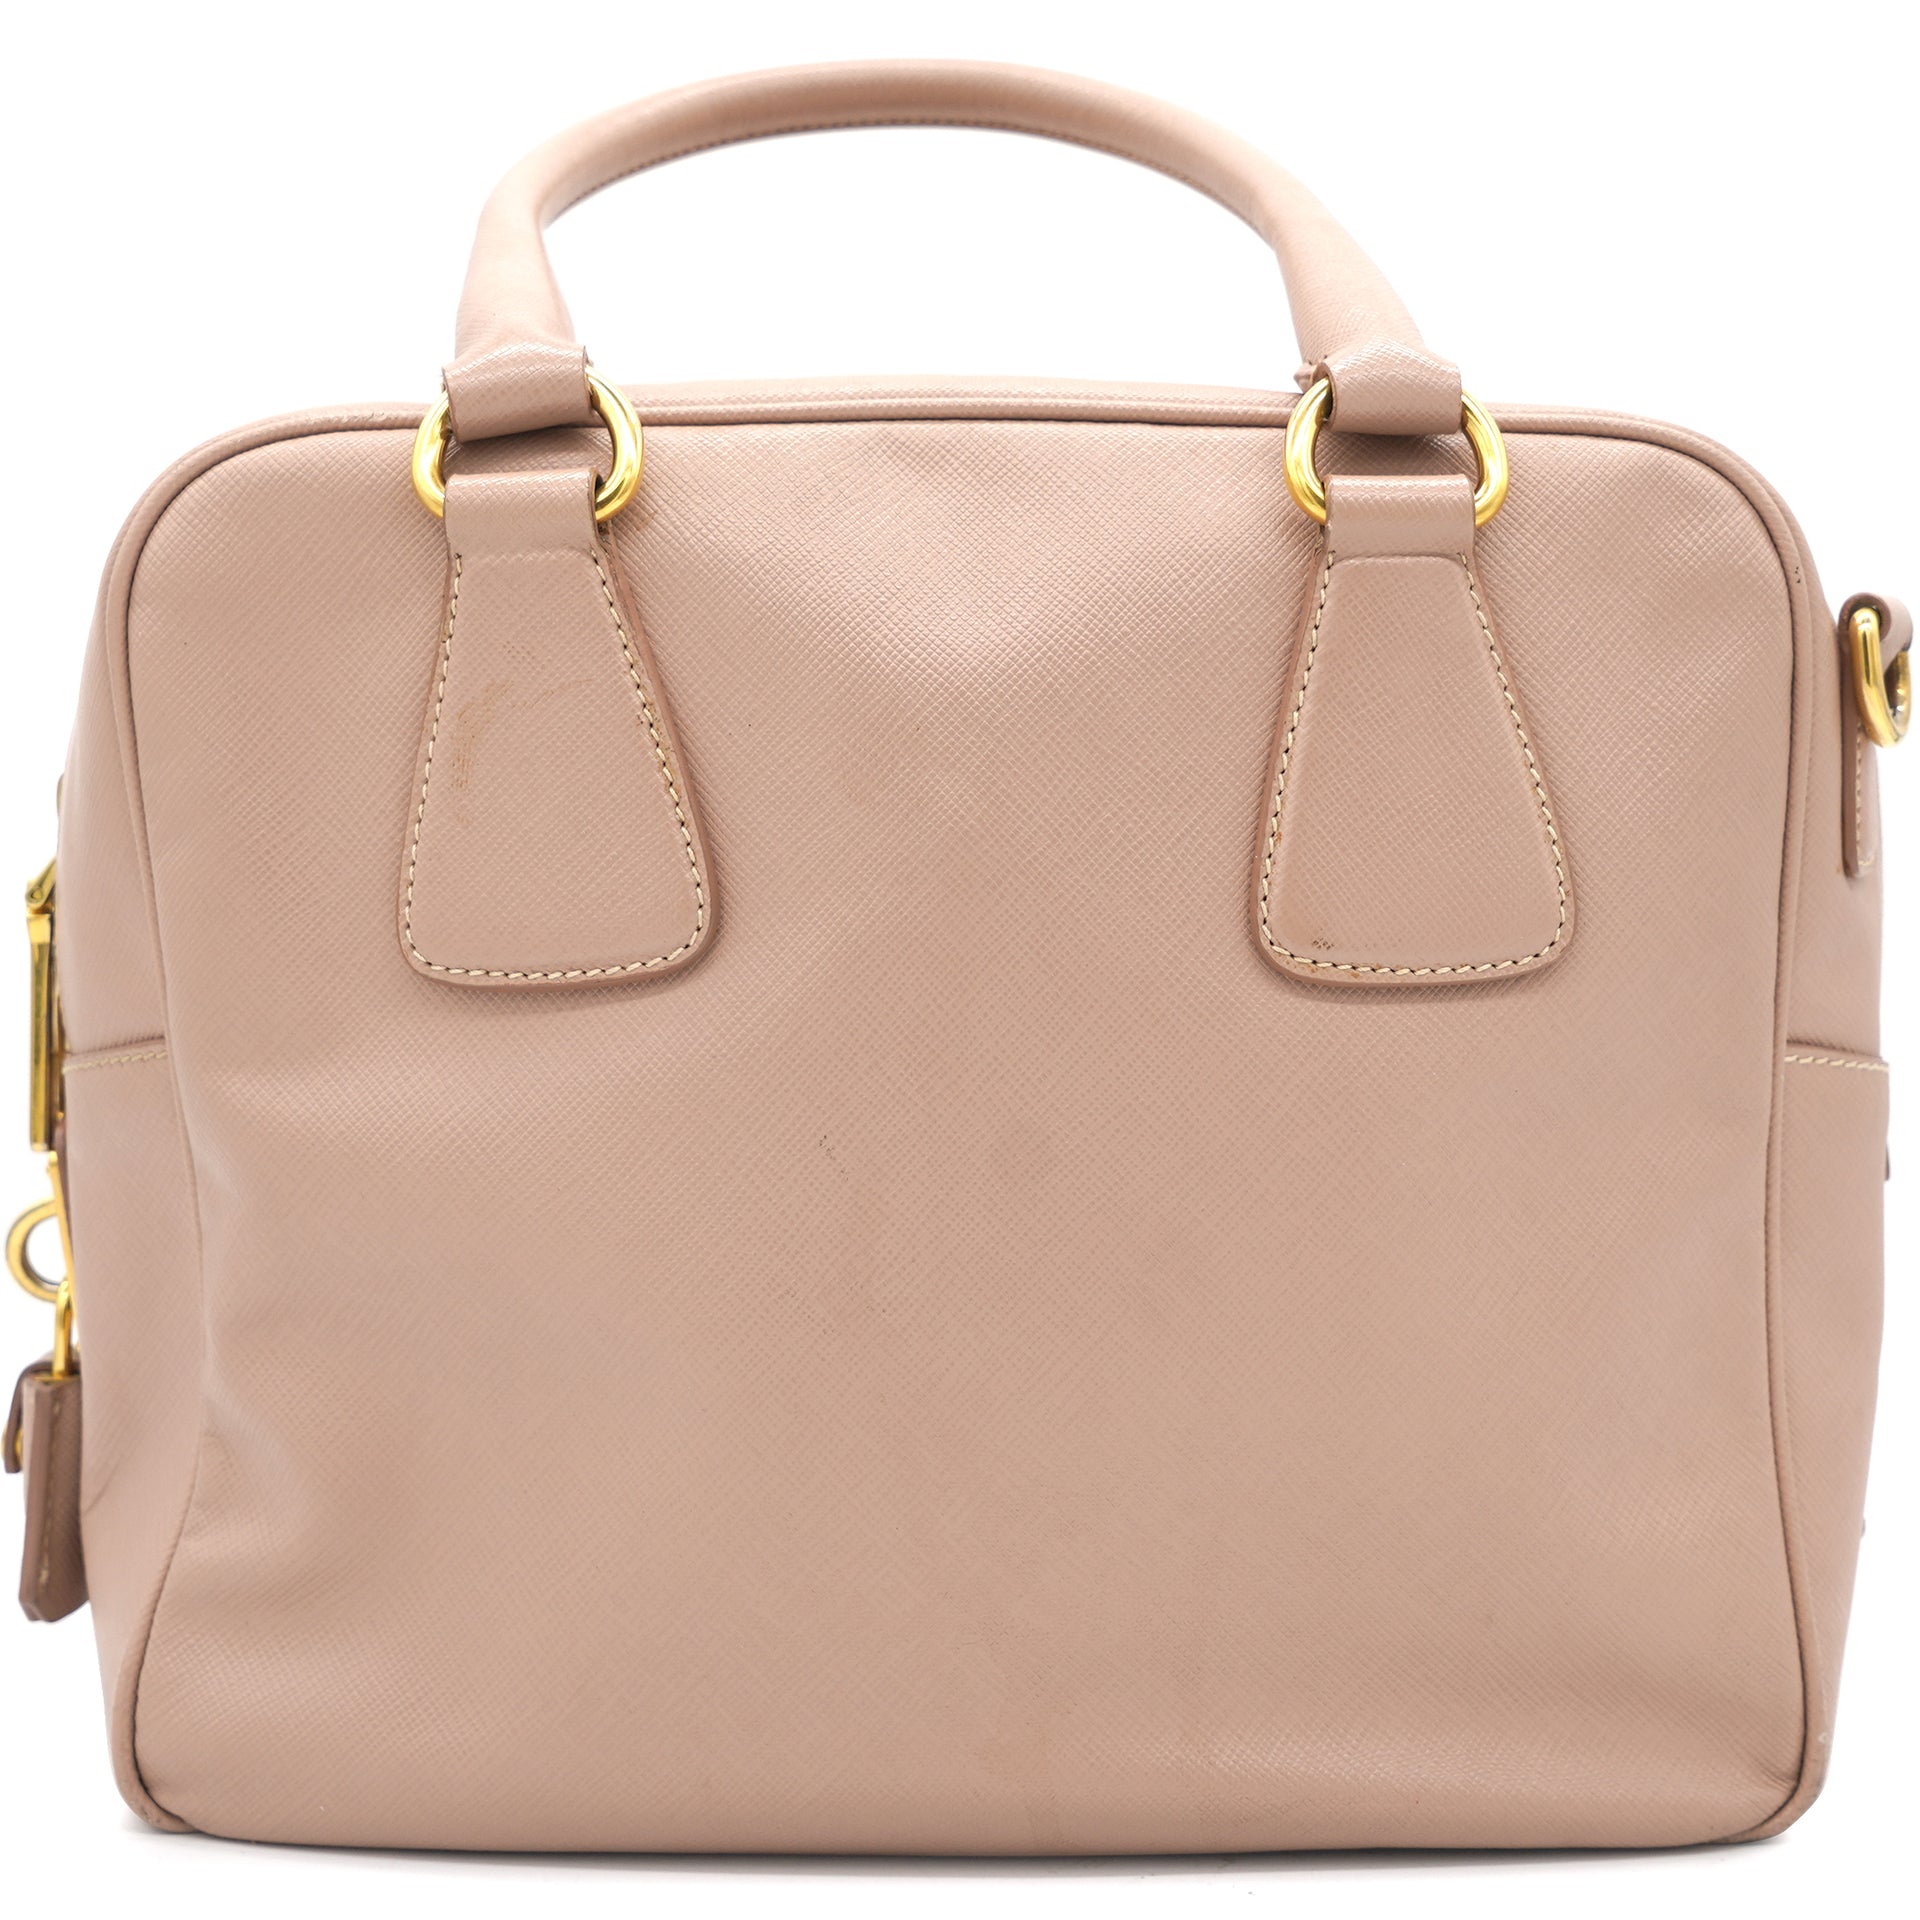 Cammeo Saffiano Lux Leather Top Handle Bauletto Bag